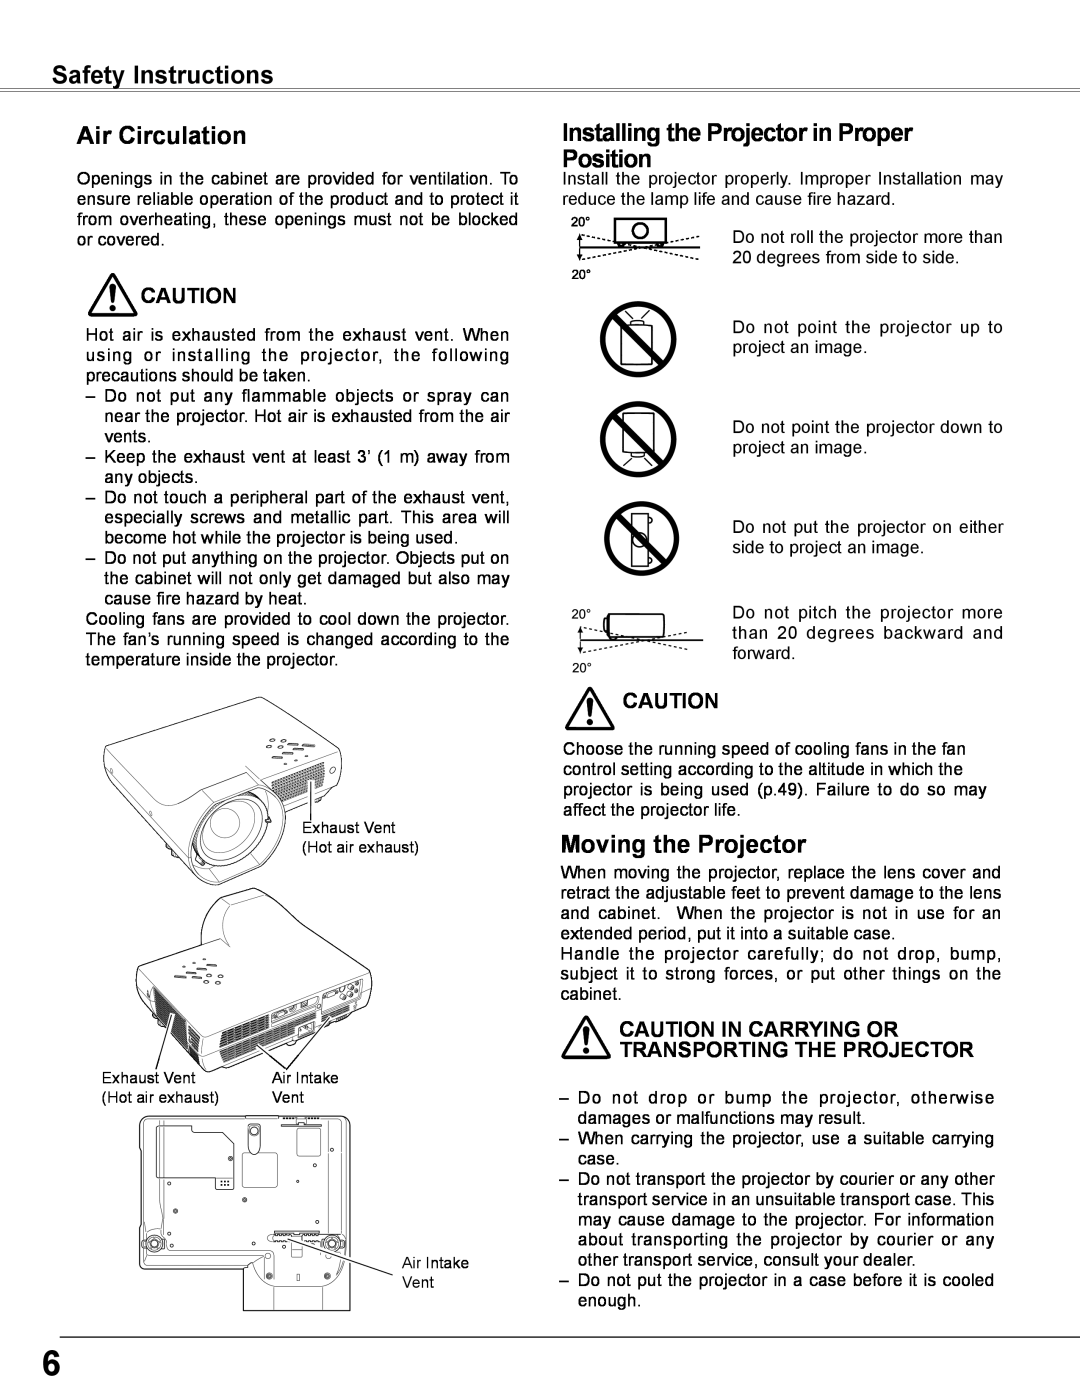 Sanyo PLC-WXE46 Safety Instructions Air Circulation, Installing the Projector in Proper Position, Moving the Projector 